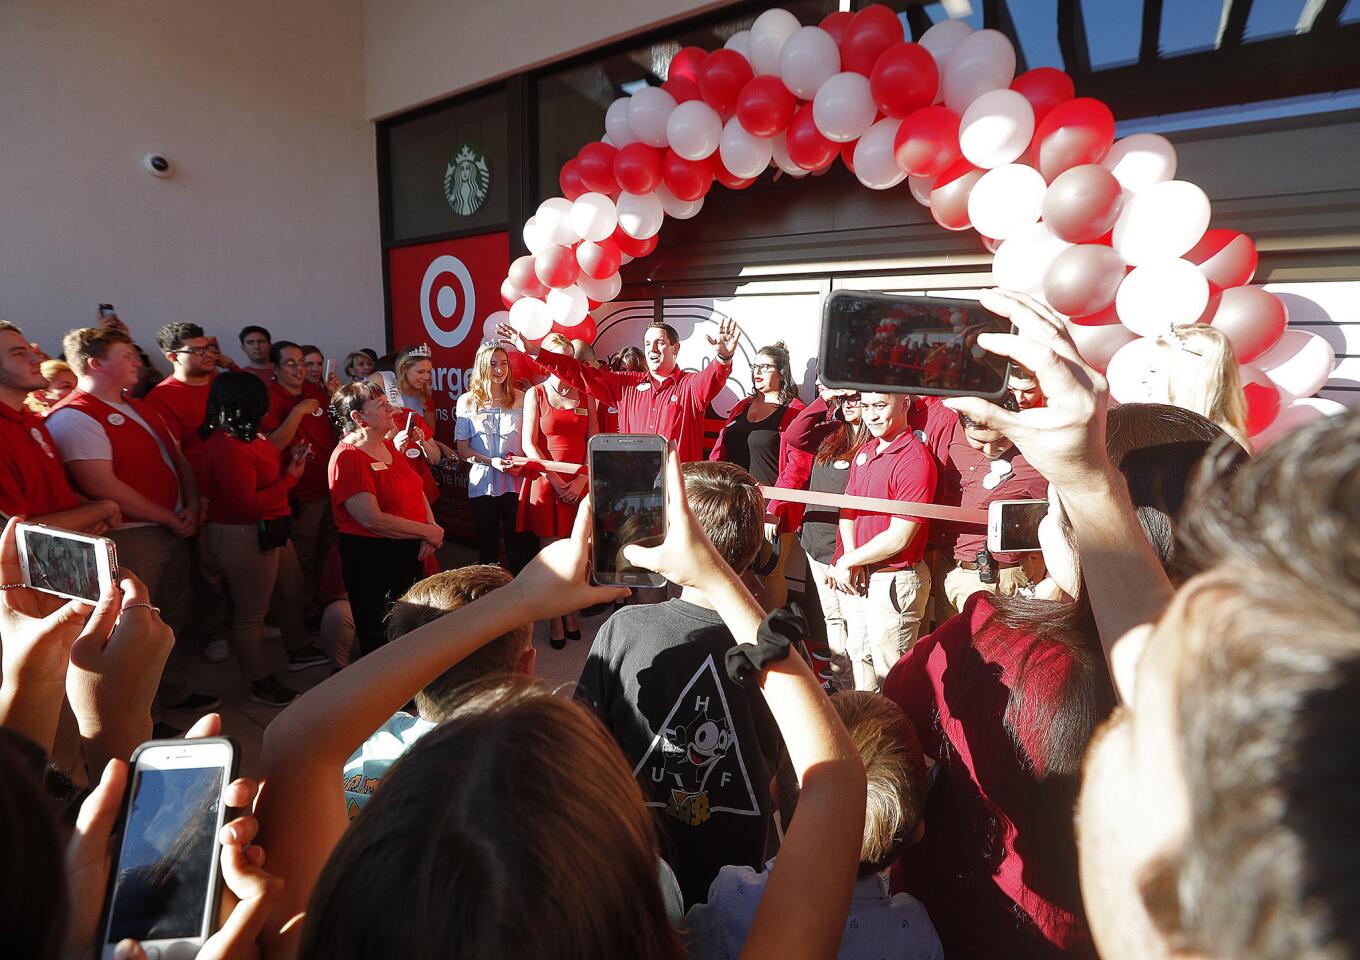 The Target store manager hails the crowd as he begins to introduce key people who helped open the store at a sneak-peek ribbon cutting to commemorate the grand opening of Target on Tuesday, October 16, 2018. Several city dignitaries, including the city council, State Senator Anthony Portantino, and leadership representatives gathered at the former Sport Chalet site to note the event.